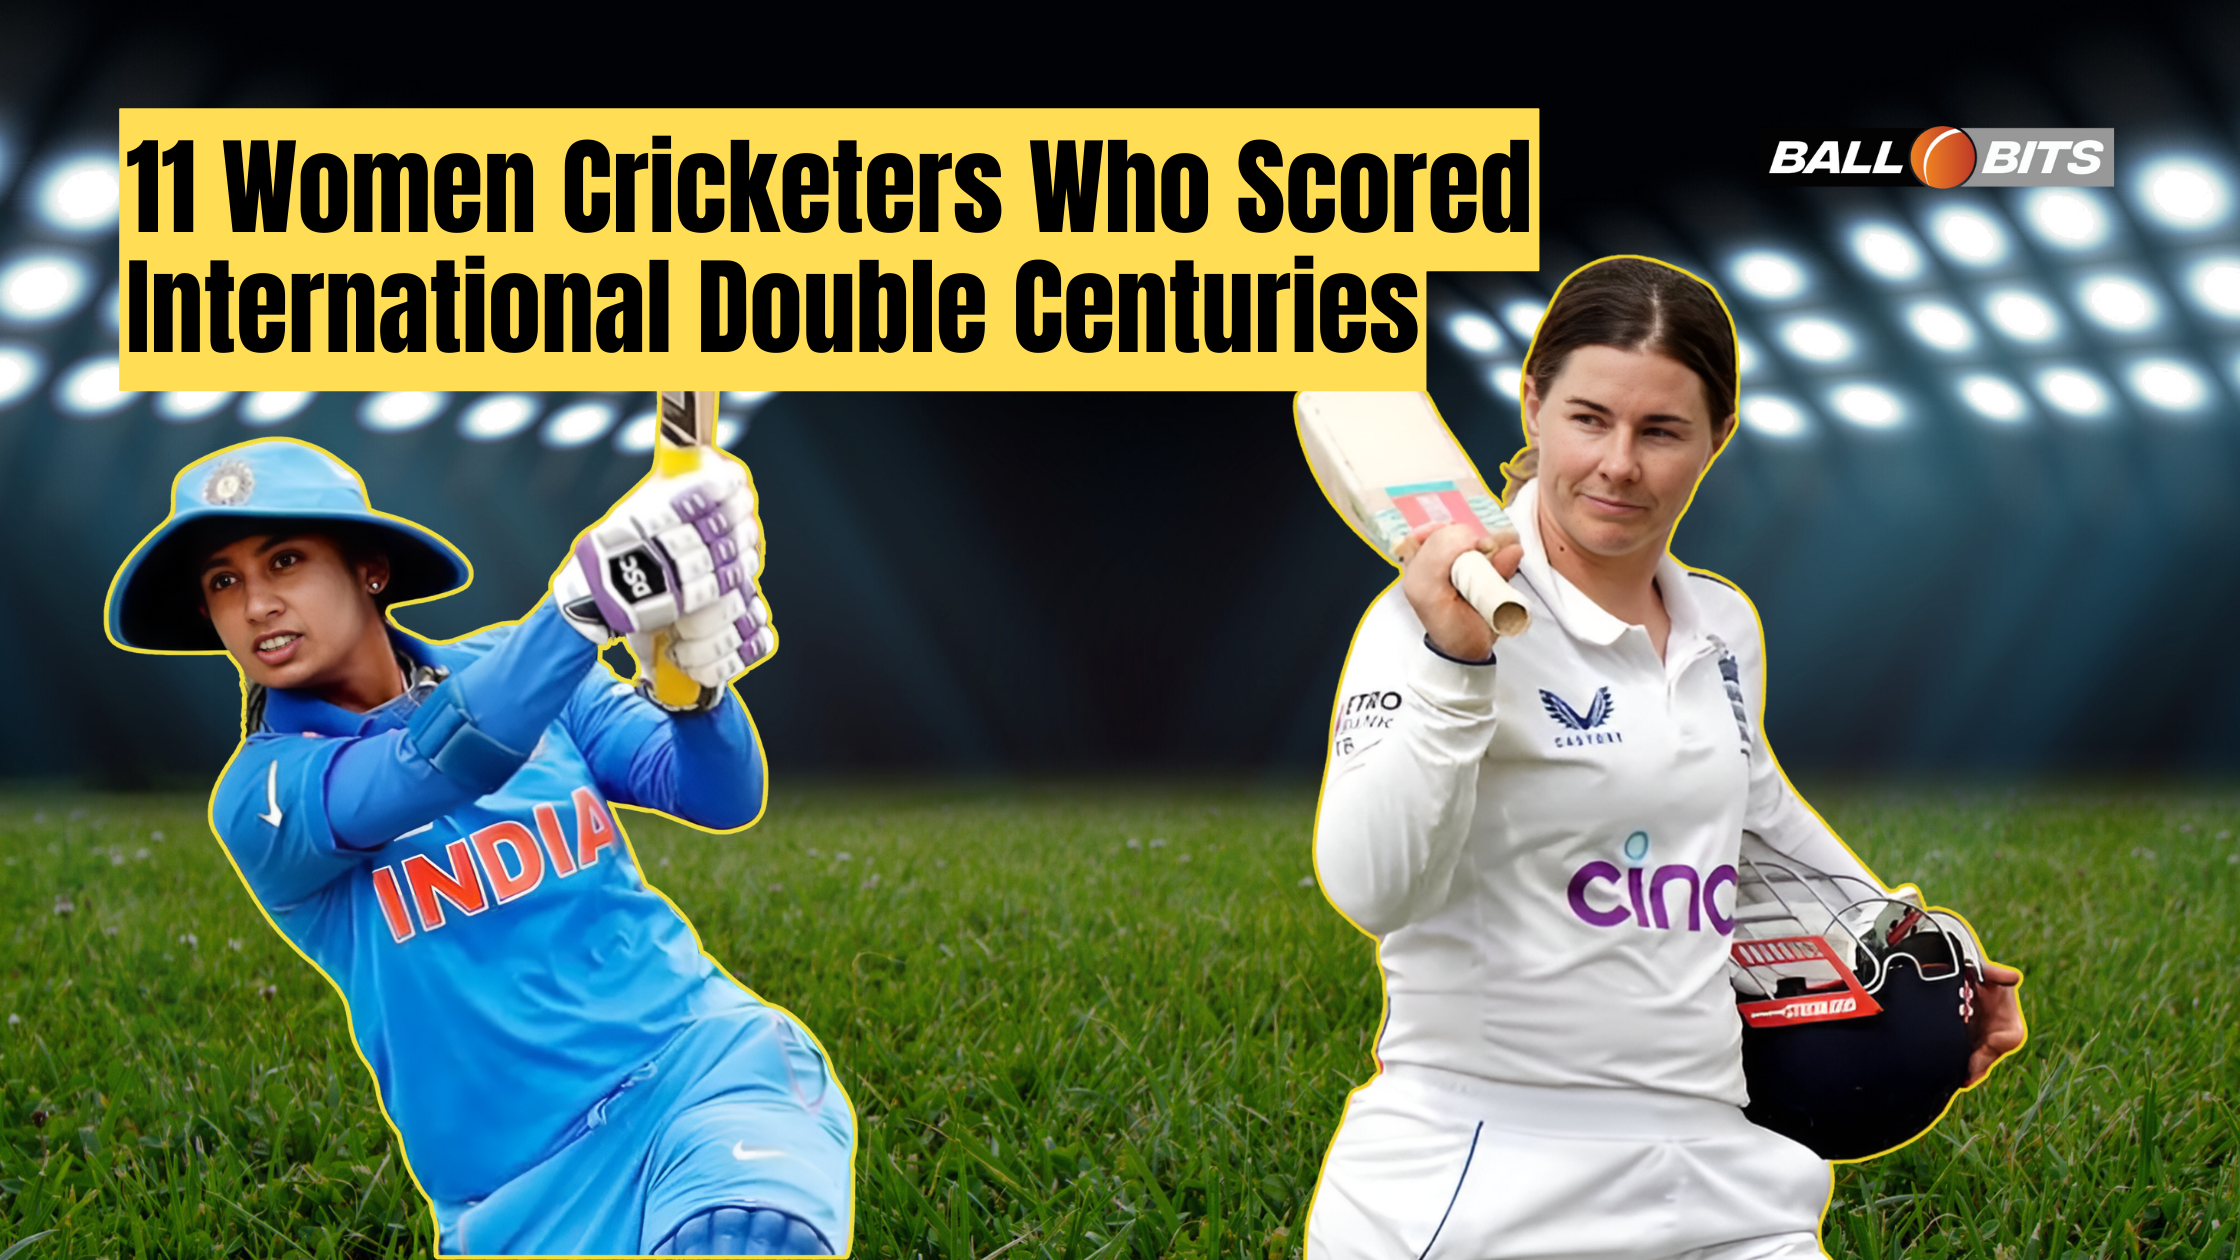 Women Cricketers with Double Centuries